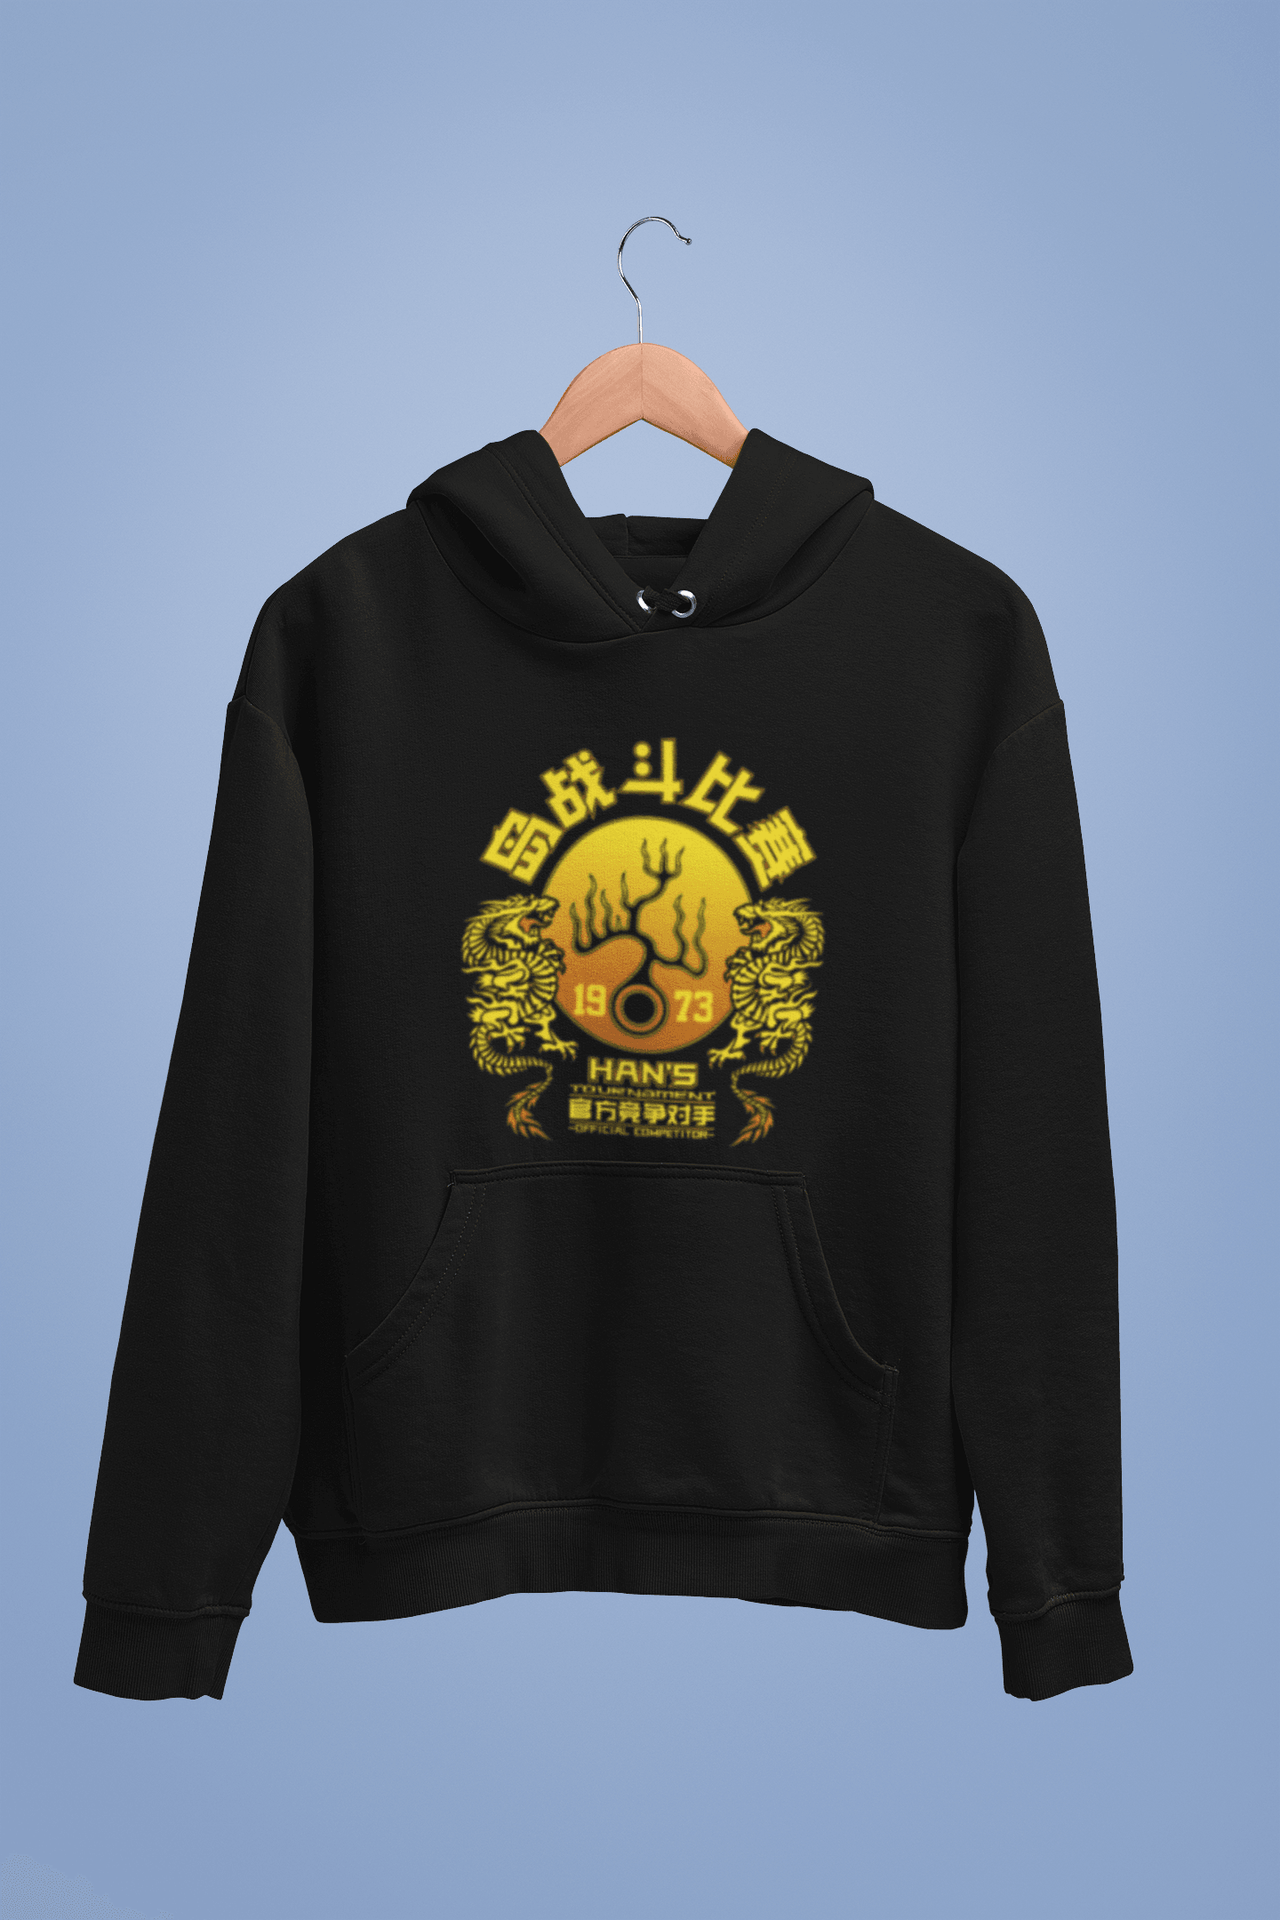 Han's Tournament Competitor Graphic Hoodie 8Ball